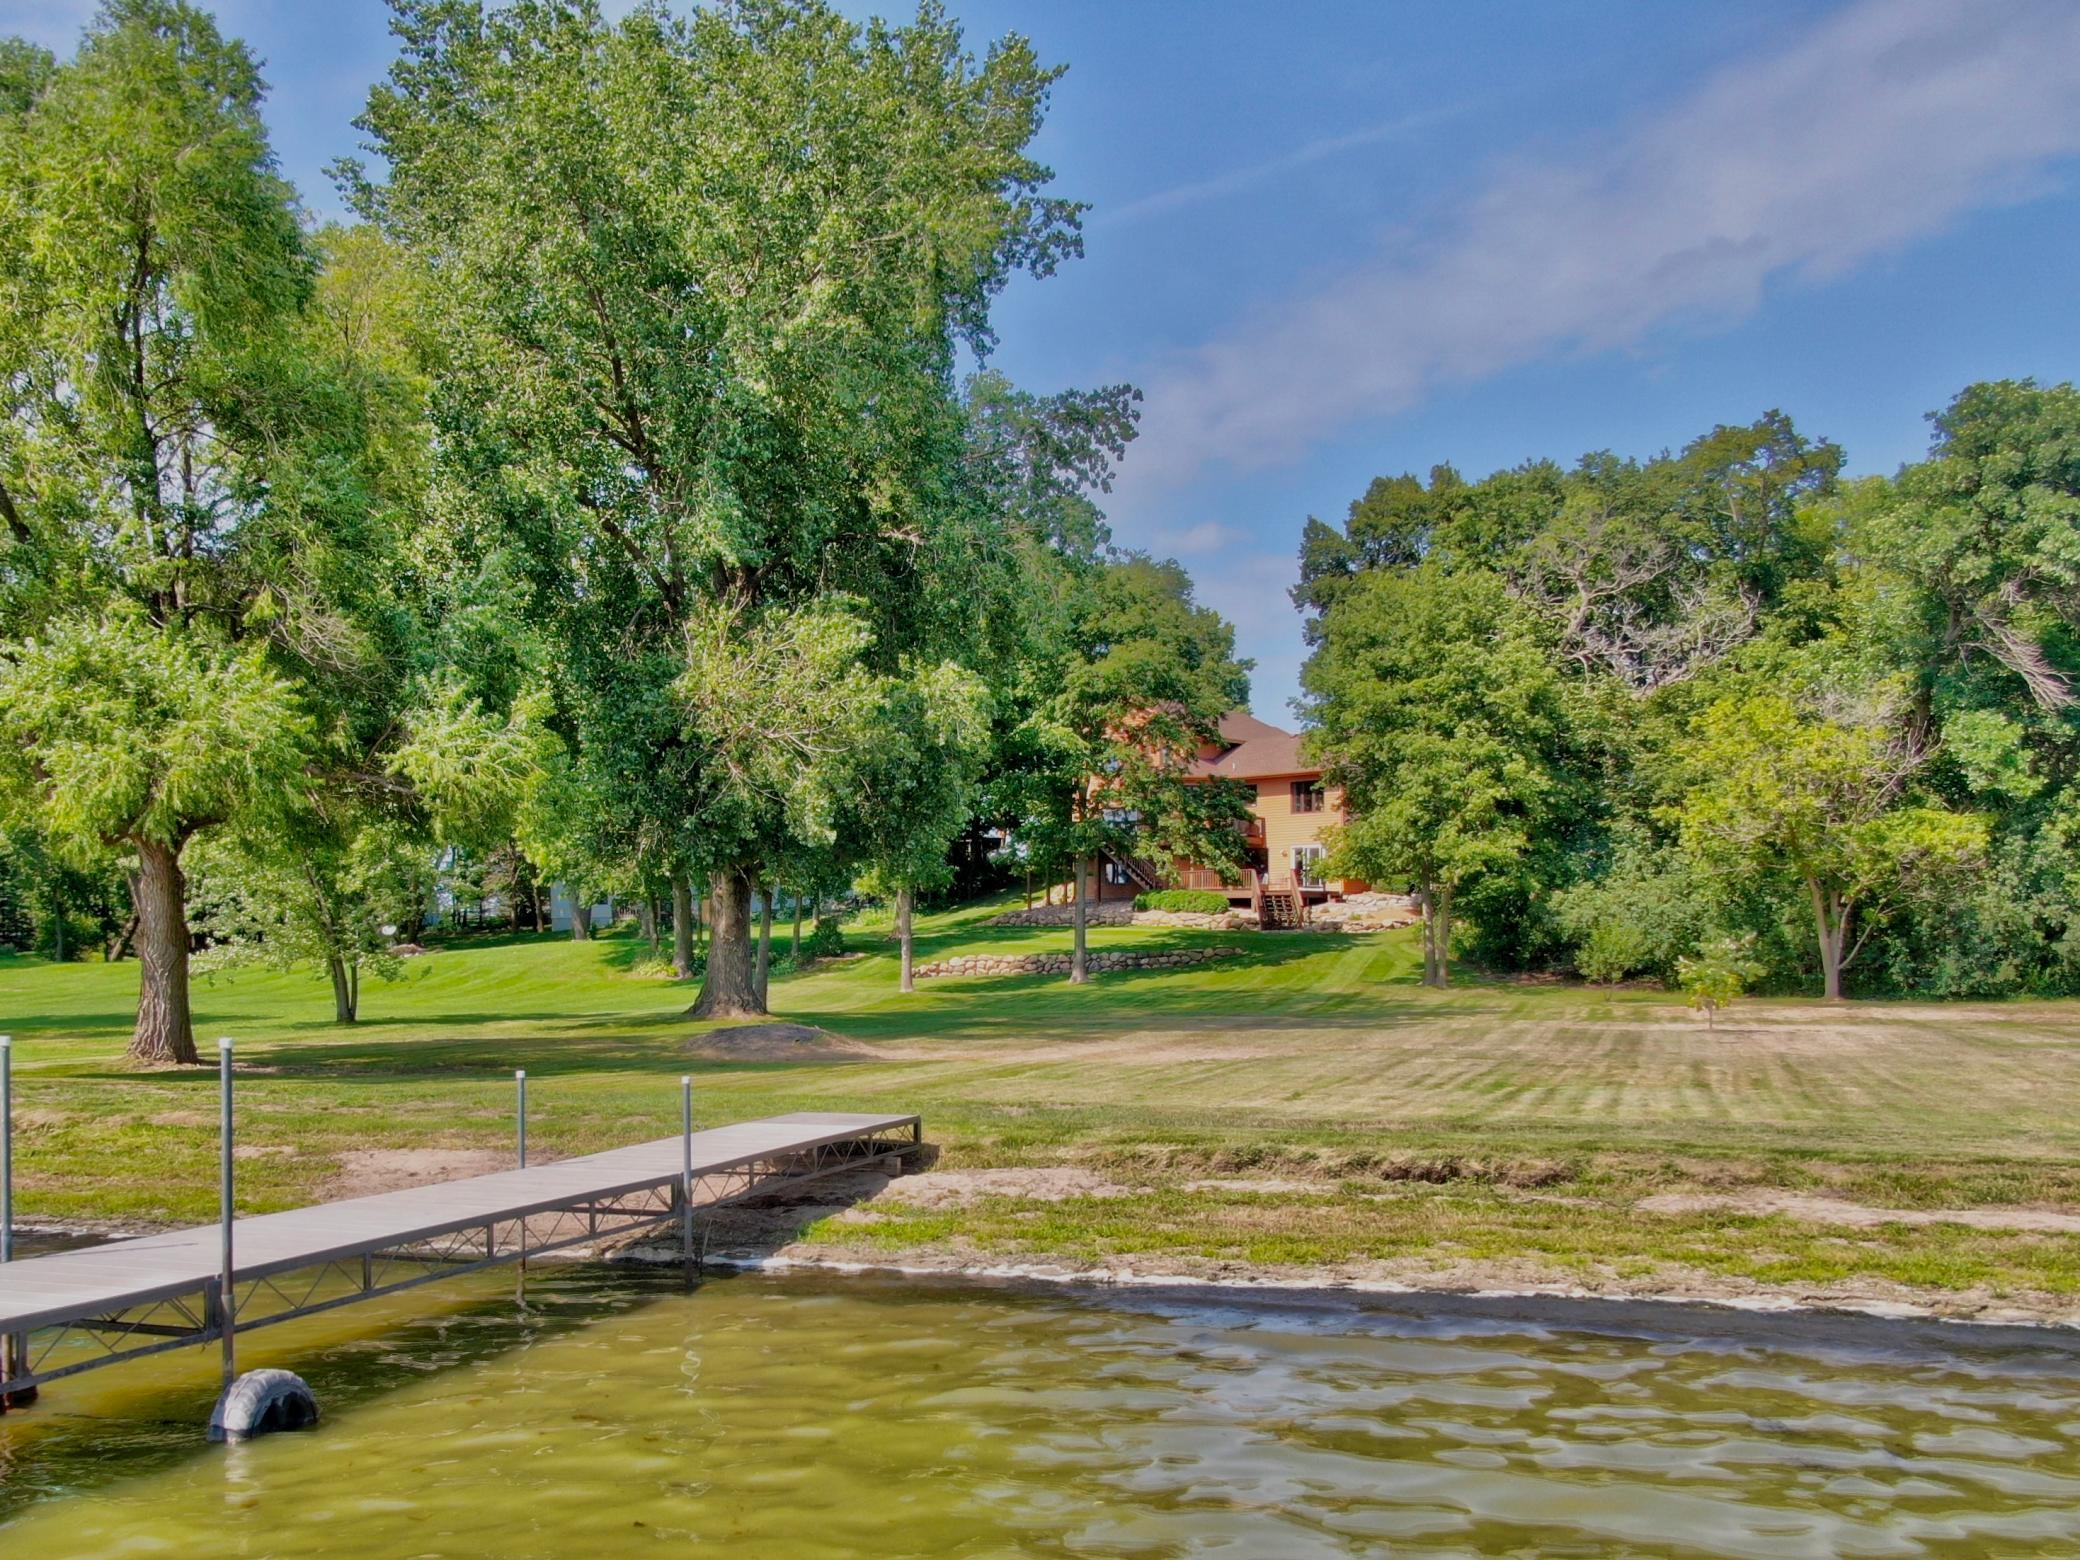 This full Southern exposure is hard to beat while at the lake. Get ready for some fun in the sun at French Lake! It's hard to find a property like this with minimal steps down to the water!